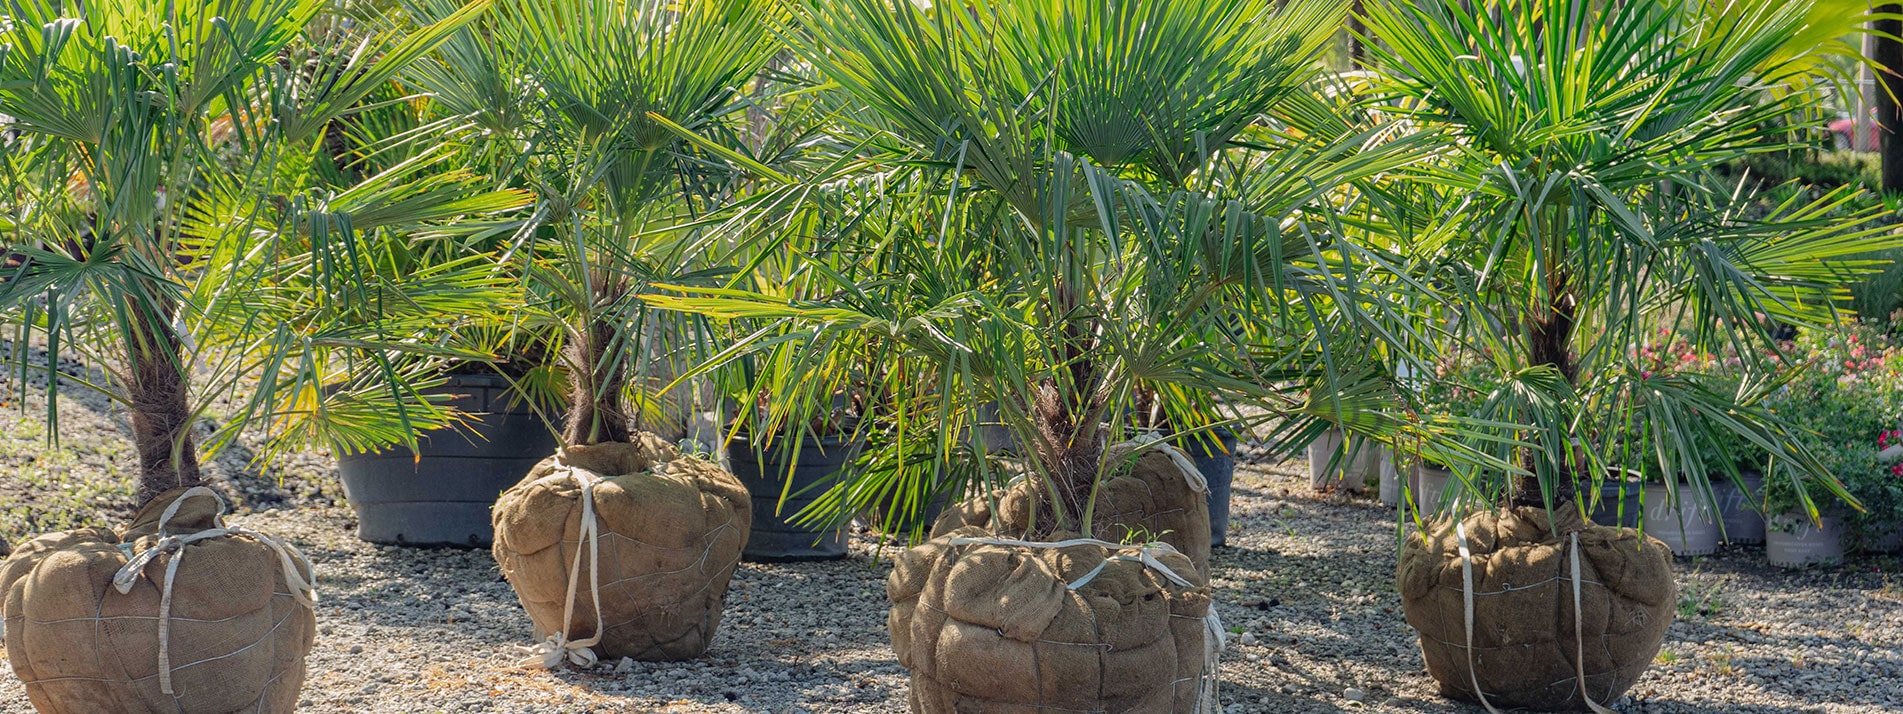 A group of palm trees in pots on the ground.